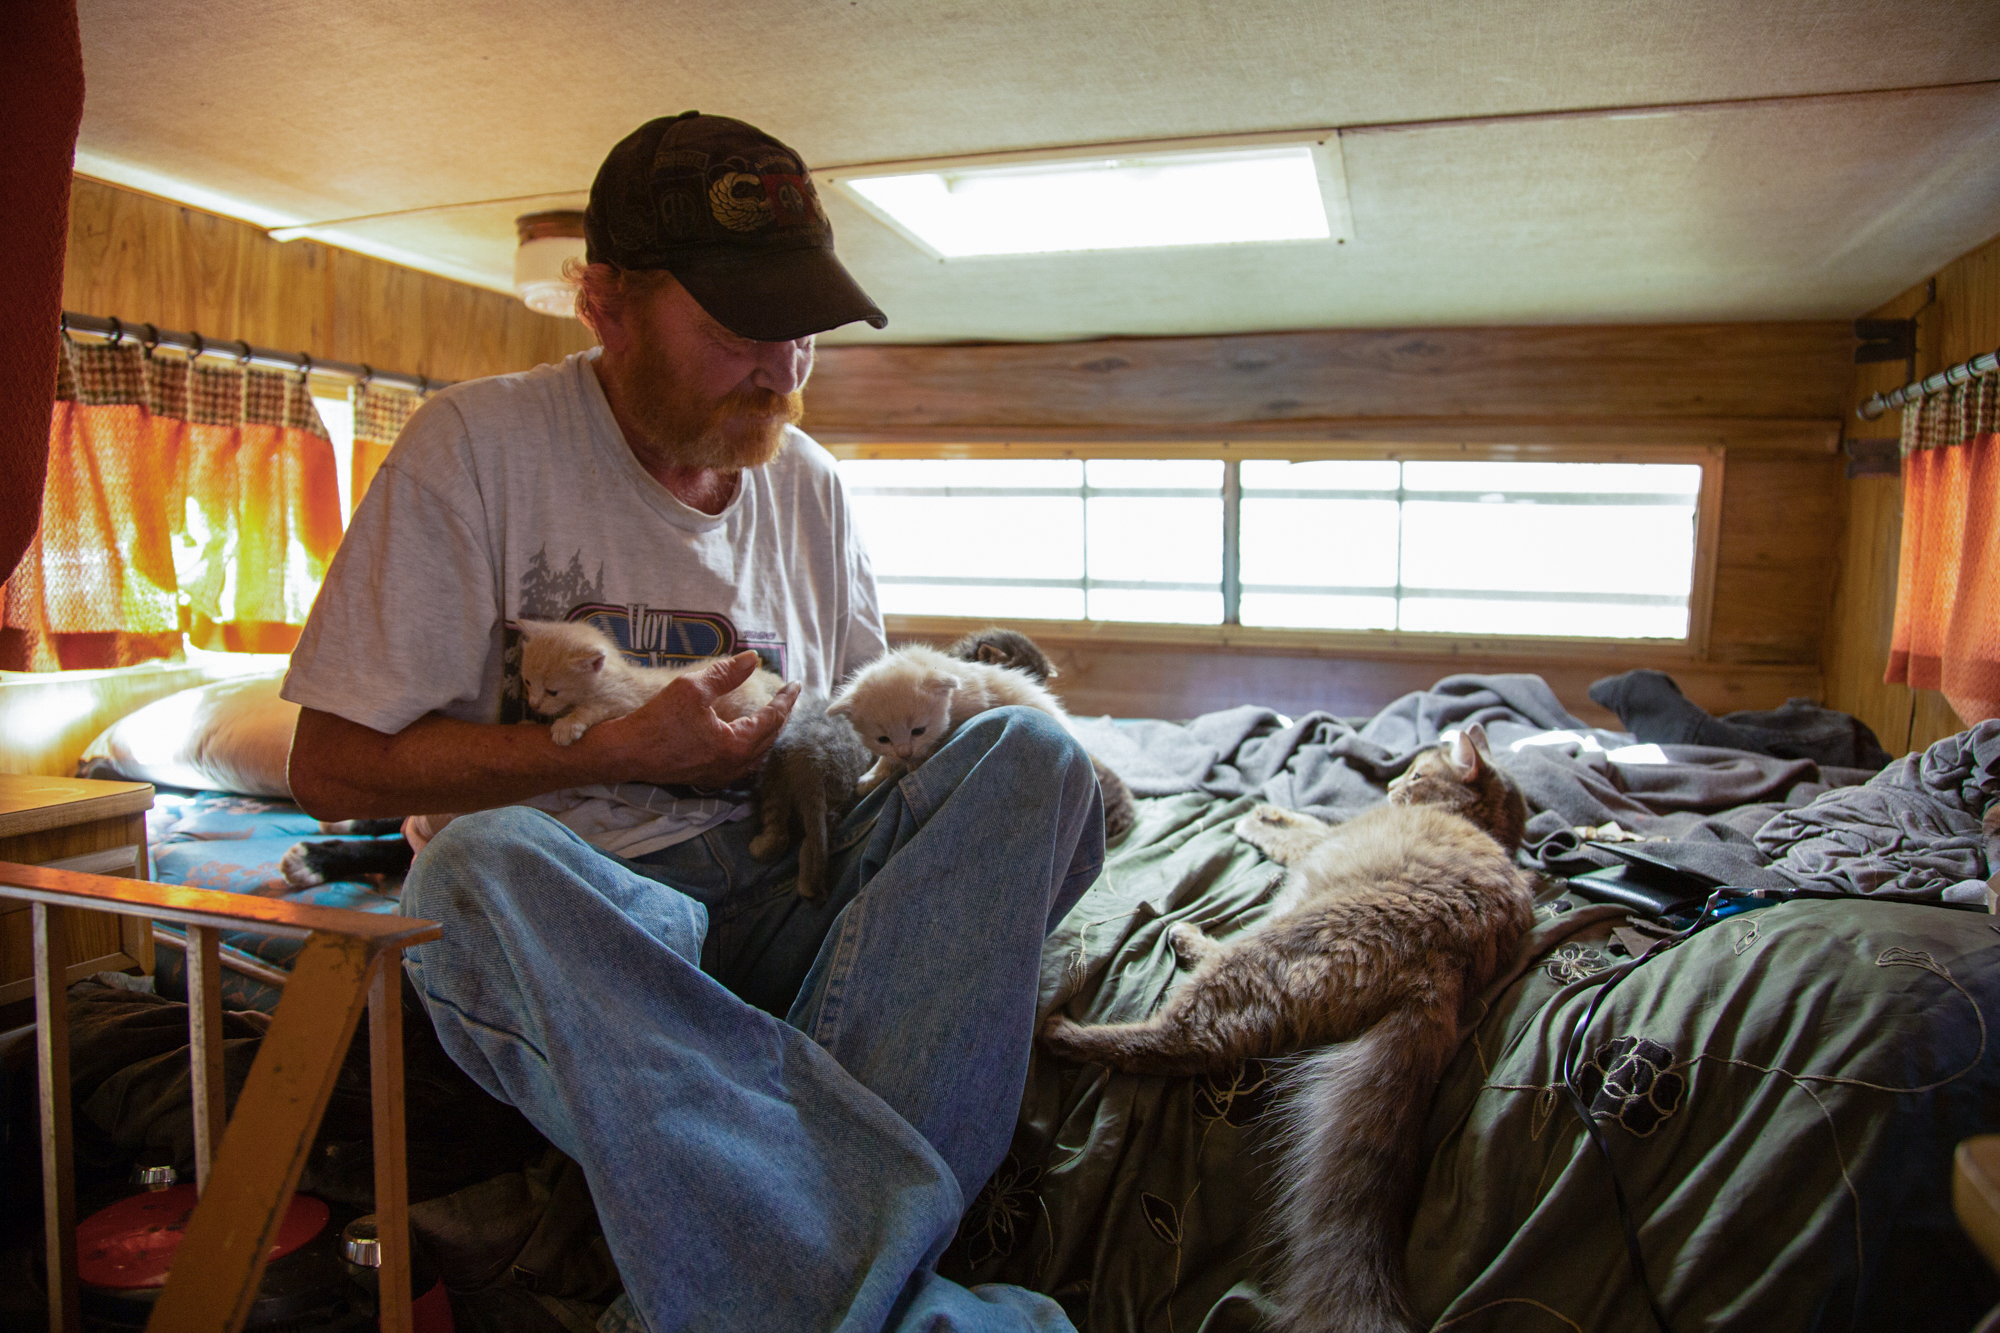 Timothy Lyons - Timothy Lyons lost his trailer home in Magalia to the Camp Fire, which killed 85 people in Northern California. He calls these kittens “fire cats” because their mother was pregnant when Lyons evacuated with her, and the five kittens were born in the tent where he stayed after losing his home. (Allie Barton/News21)